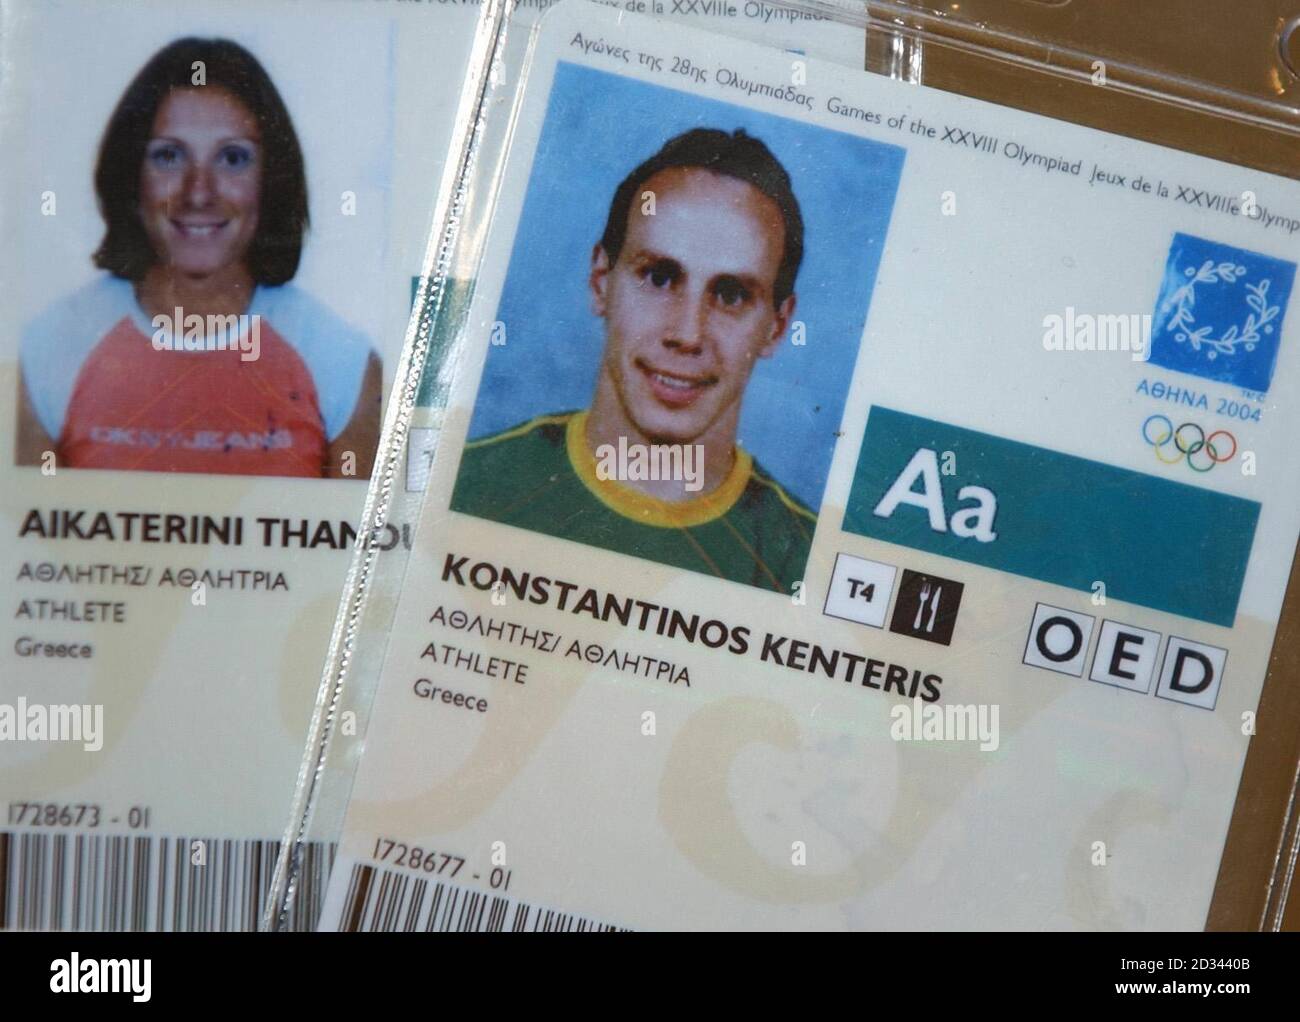 The Athens 2004 Olympic Games accreditation handed back to the International Olympic Committee by Greek athletes by Kostas Kenteris and Katerina Thanou in Athens. The athletes have had their missed drugs test case referred to the International Associations of Athletics Federations by the IOC's Executive Board. Stock Photo